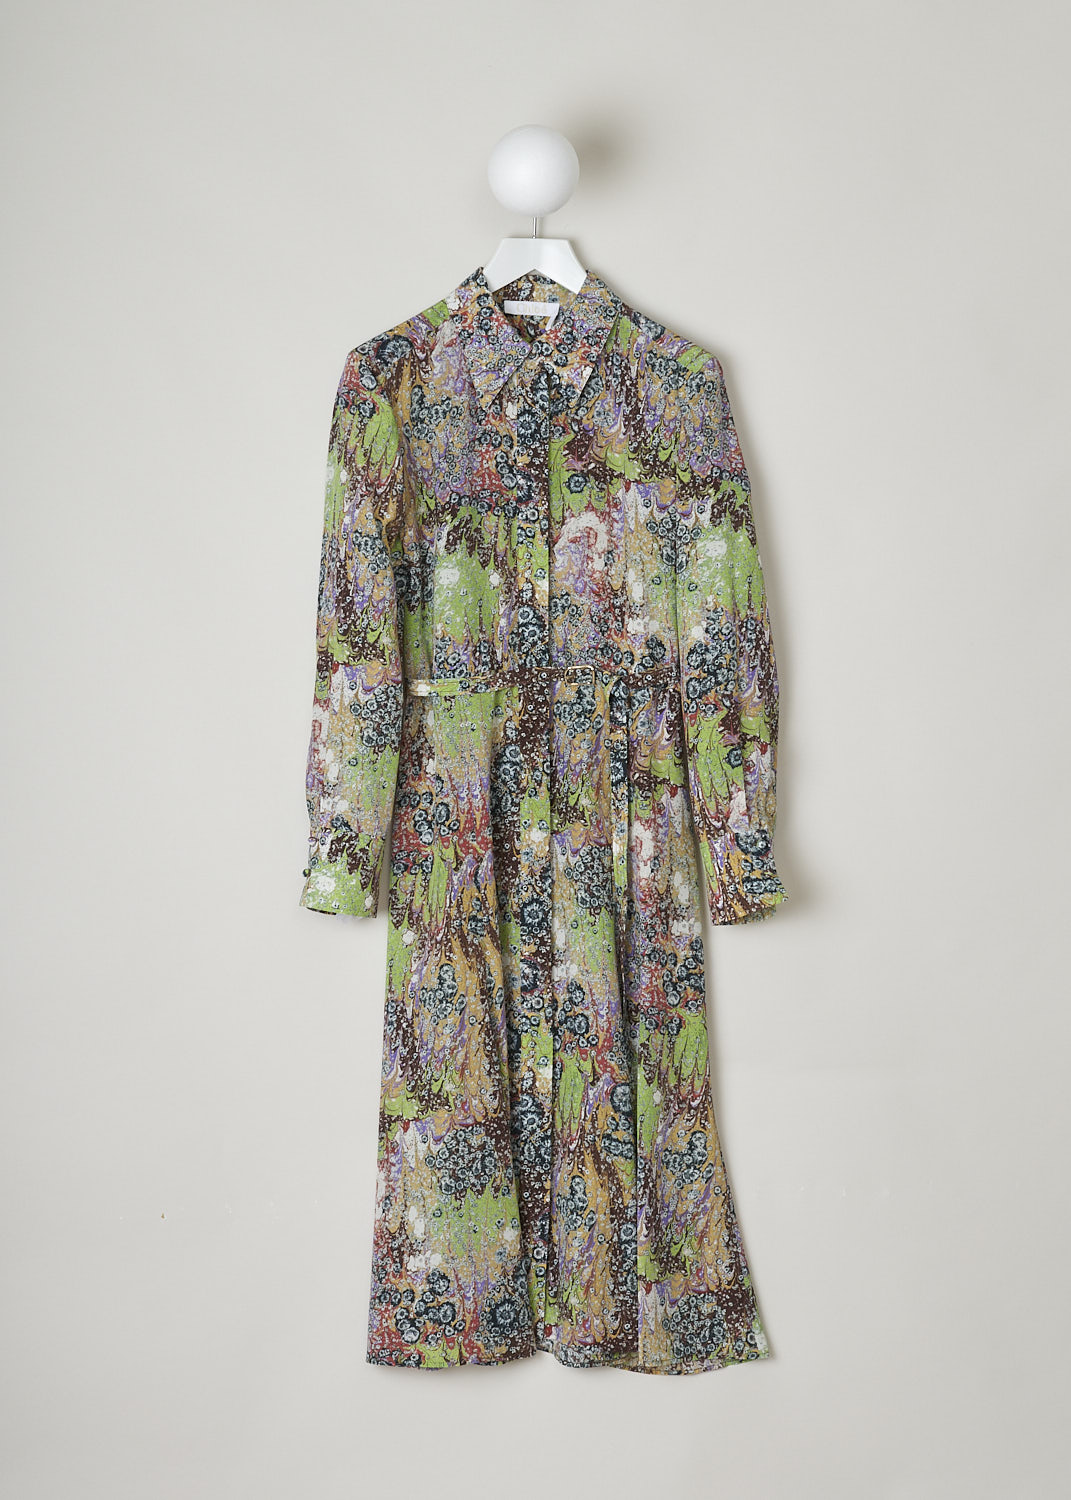 CHLOÃ‰, MULTICOLOR PRINTED SHIRT DRESS WITH BELT, CHC21WRO363053ZA_MULTICOLOR_GREEN, Print, Green, Brown, Front, This silk shirt dress has an all-over multicolored print. The dress has a pointed collar and a concealed front button closure. The long sleeves have buttoned cuffs. The midi-length skirt flares out. The dress comes with a narrow belt in the same fabric.   
